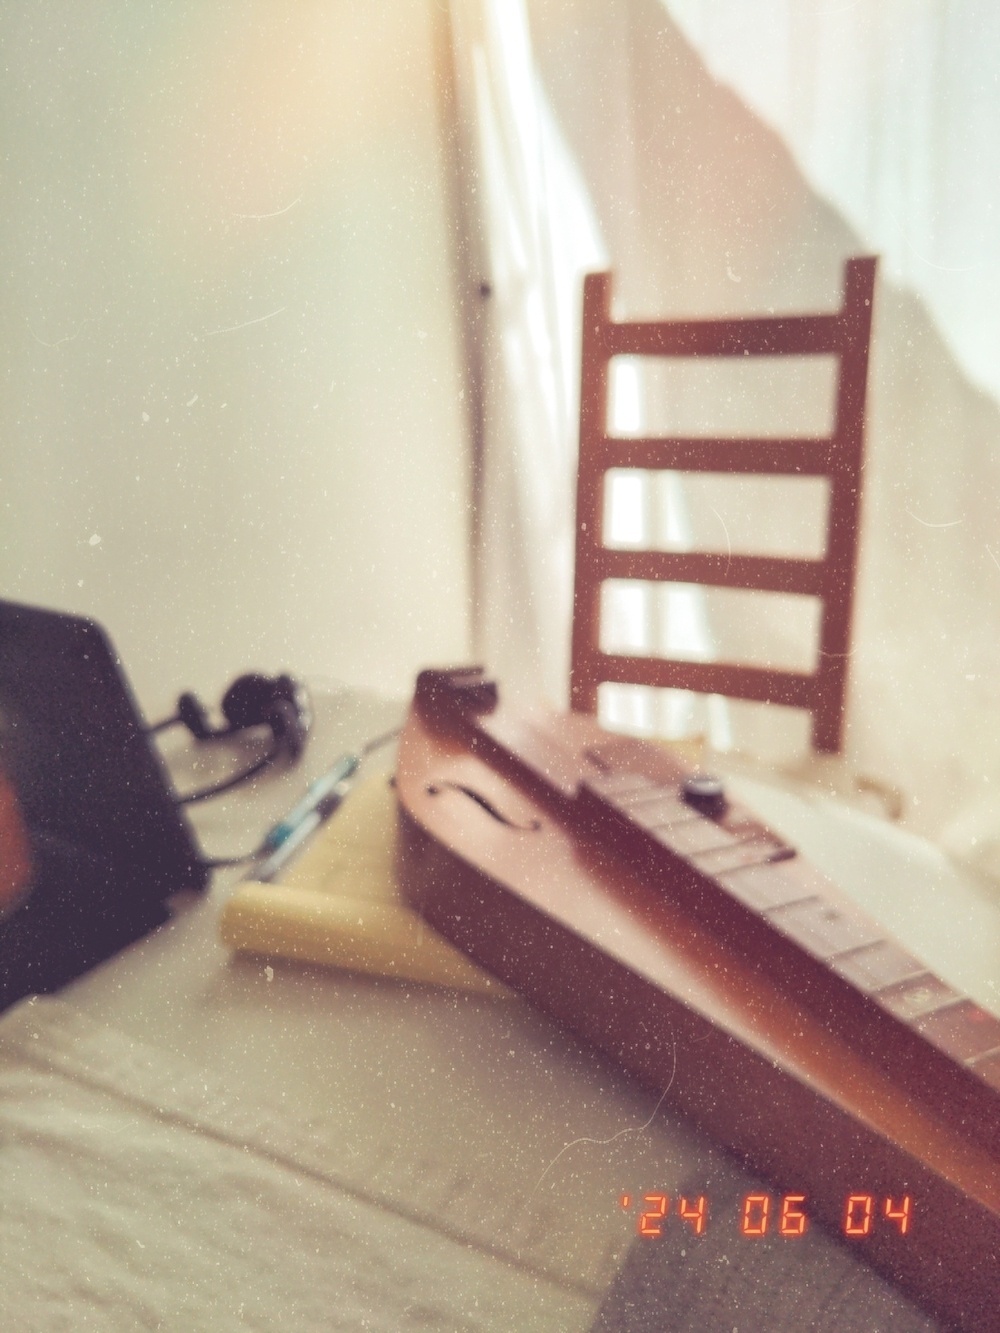 A dulcimer, a notebook, and a tablet on a table next to a wooden chair with sunlight streaming through a curtained window. The date "24 06 04" is visible in the corner.